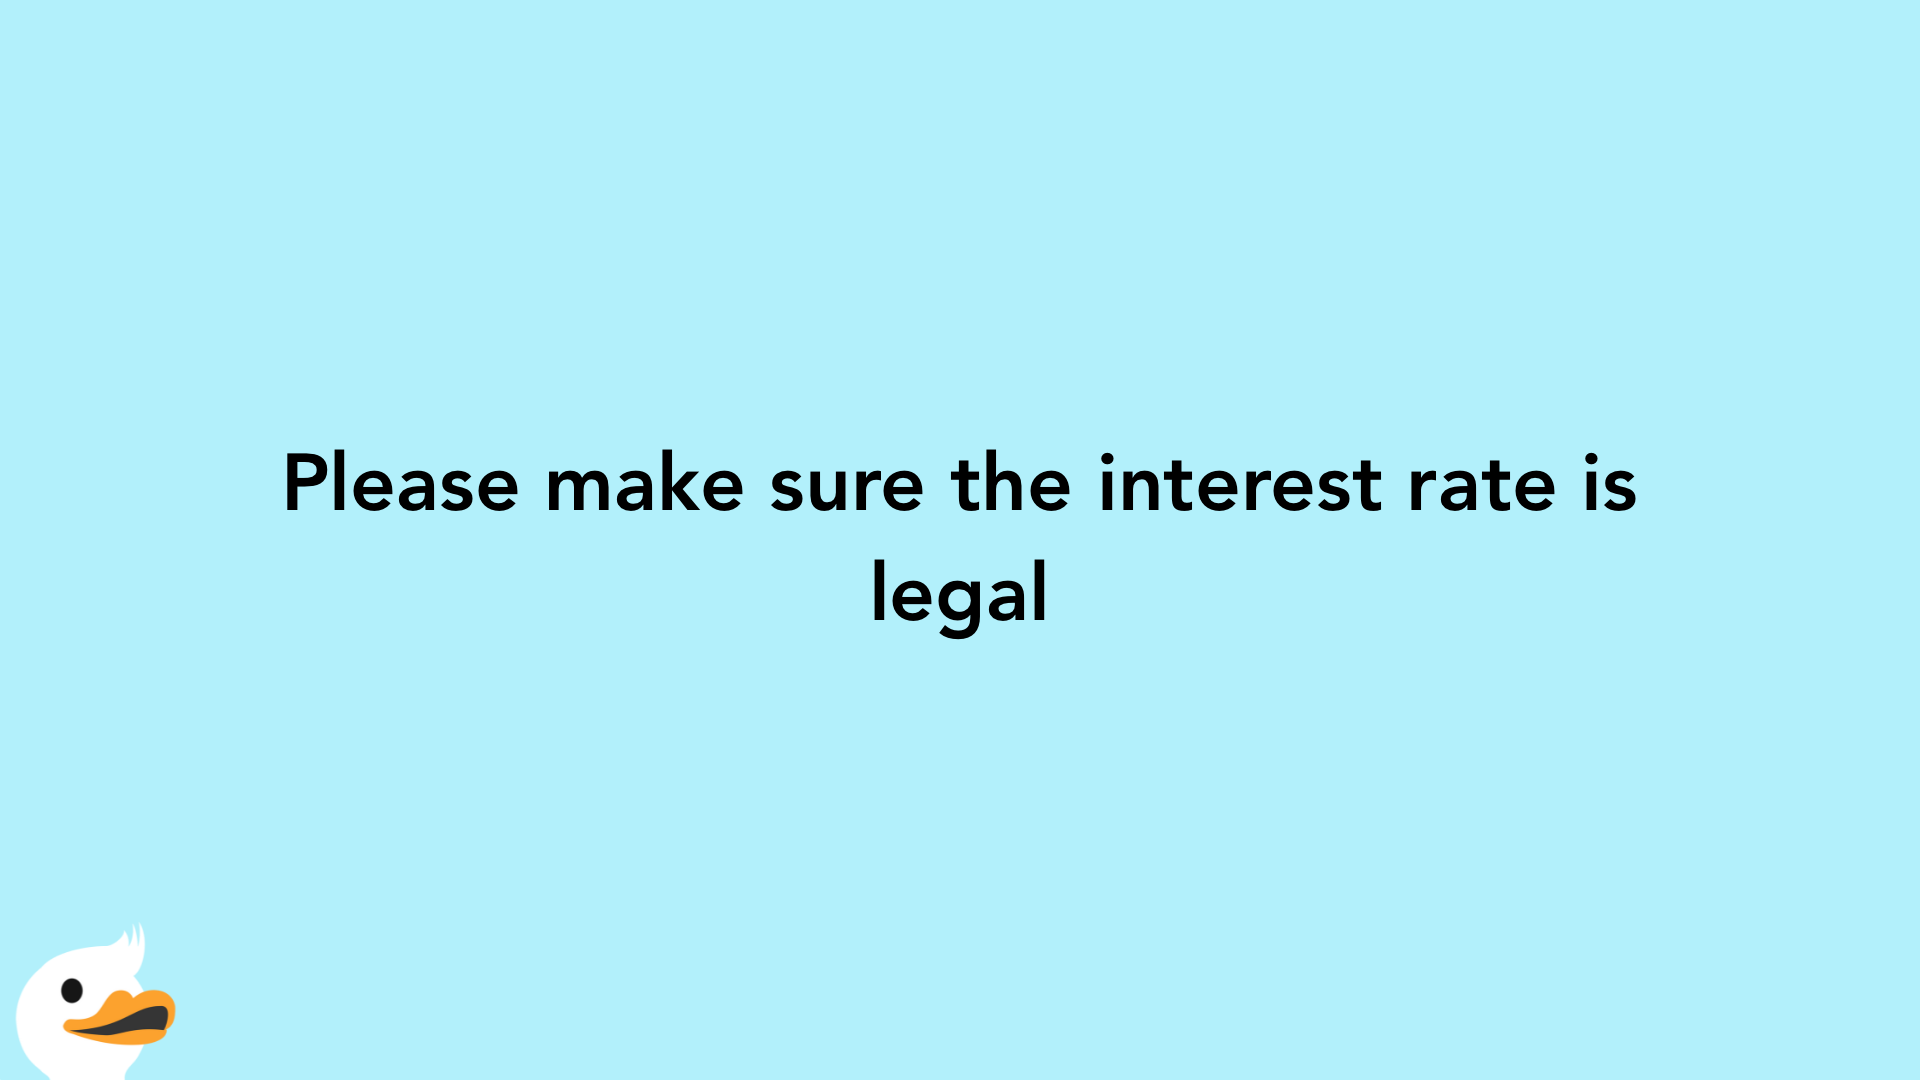 Please make sure the interest rate is legal